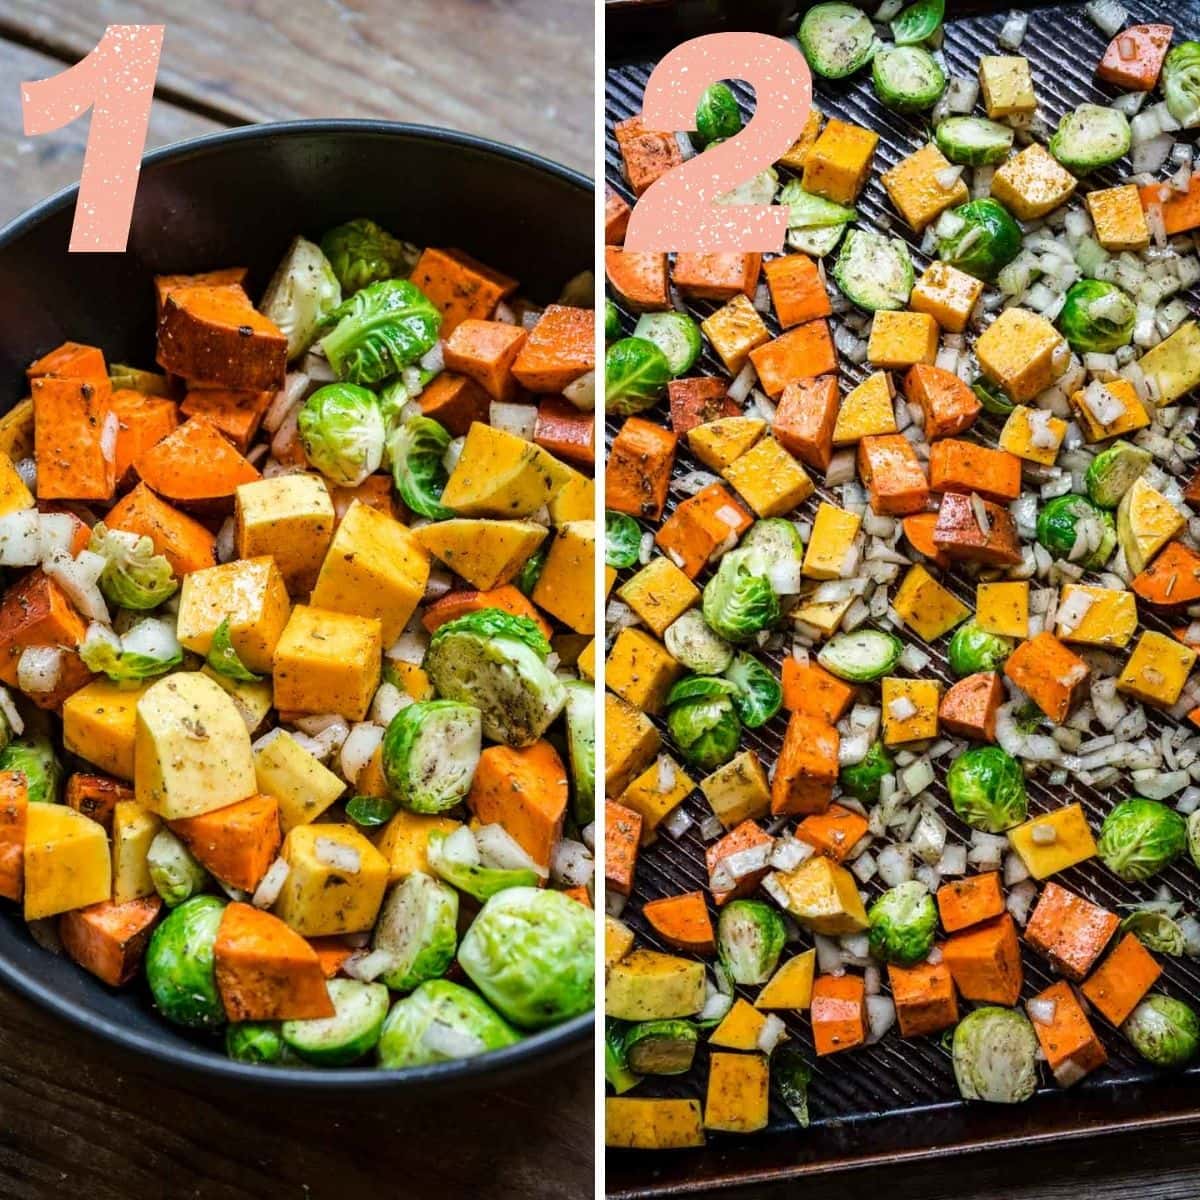 On the left: vegetables coated with spices. On the right: vegetables on a sheet pan before roasting.